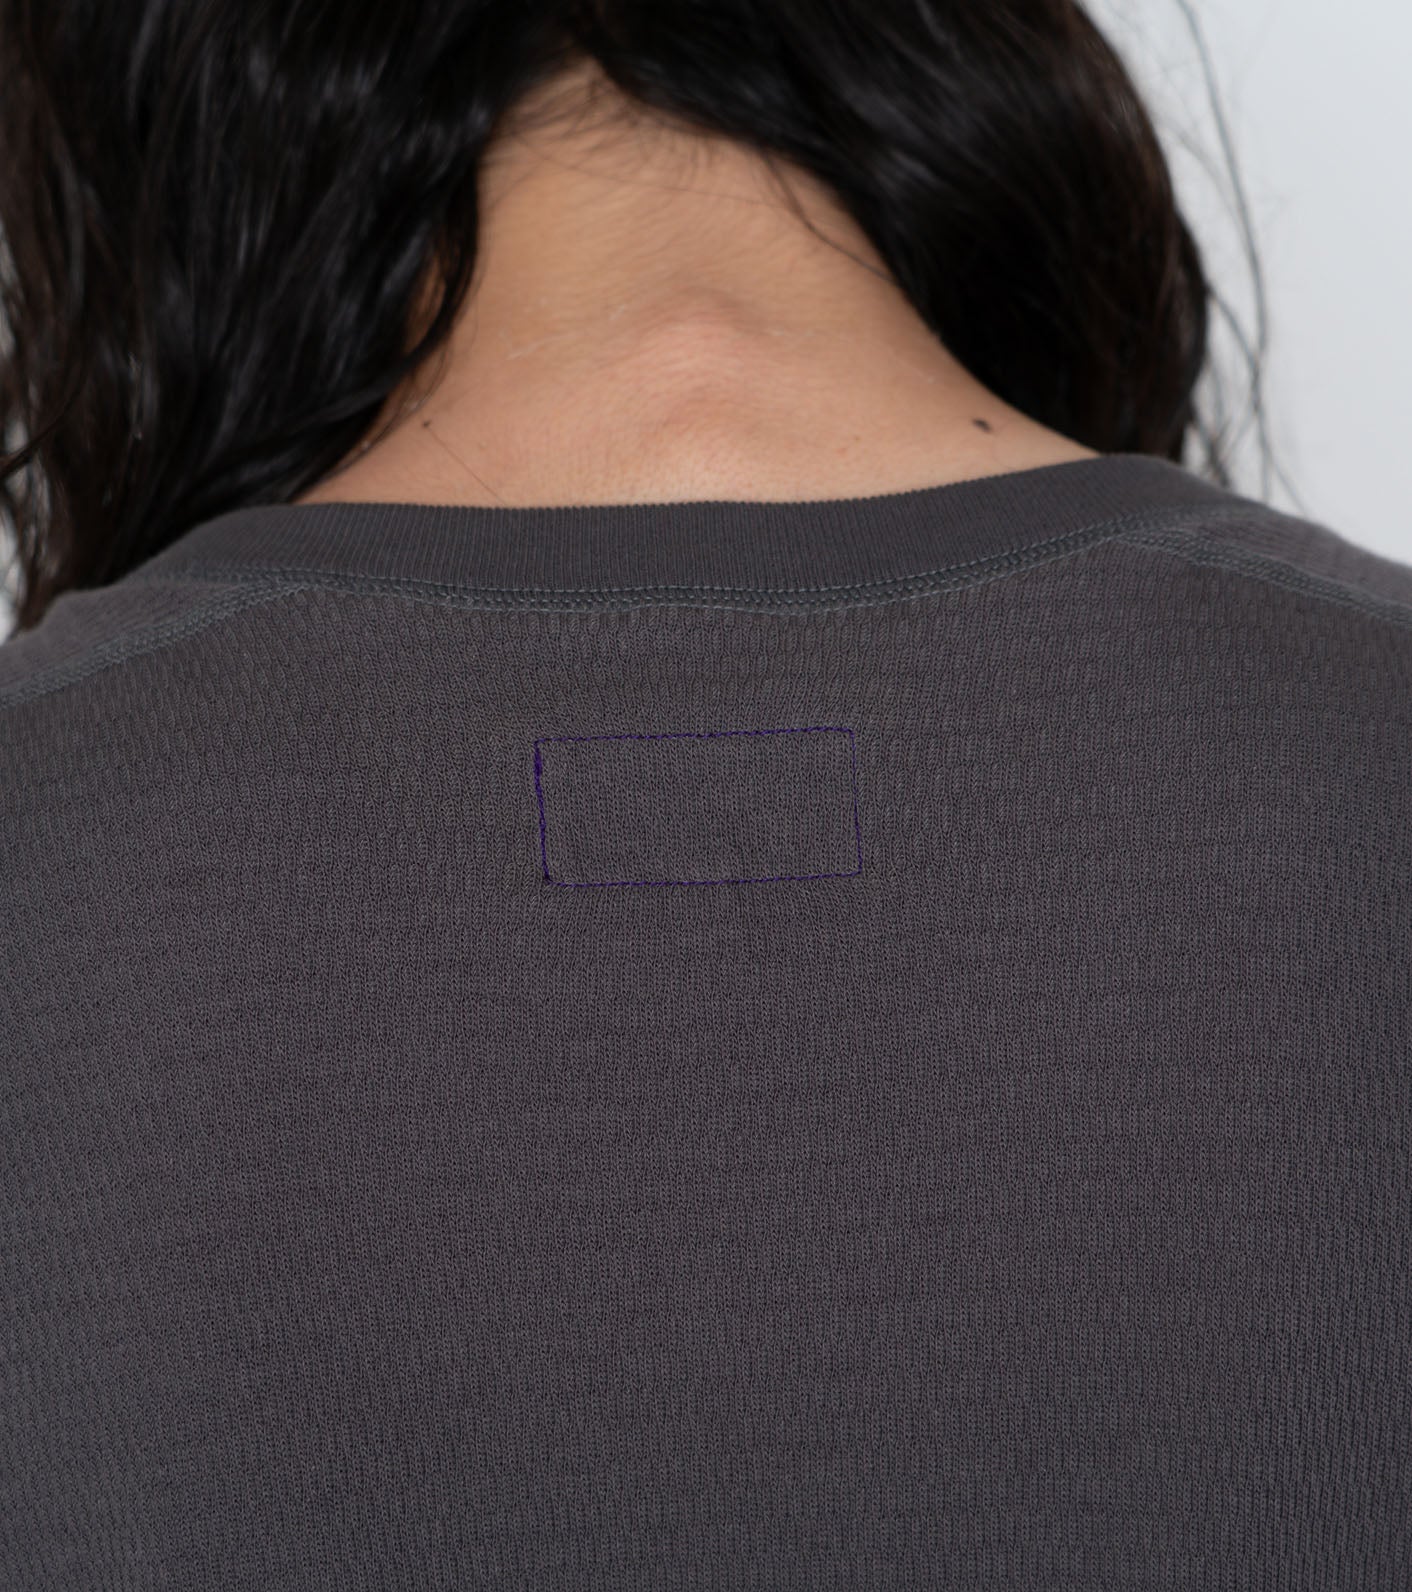 THE NORTH FACE PURPLE LABEL Thermal Field Long Sleeve Tee